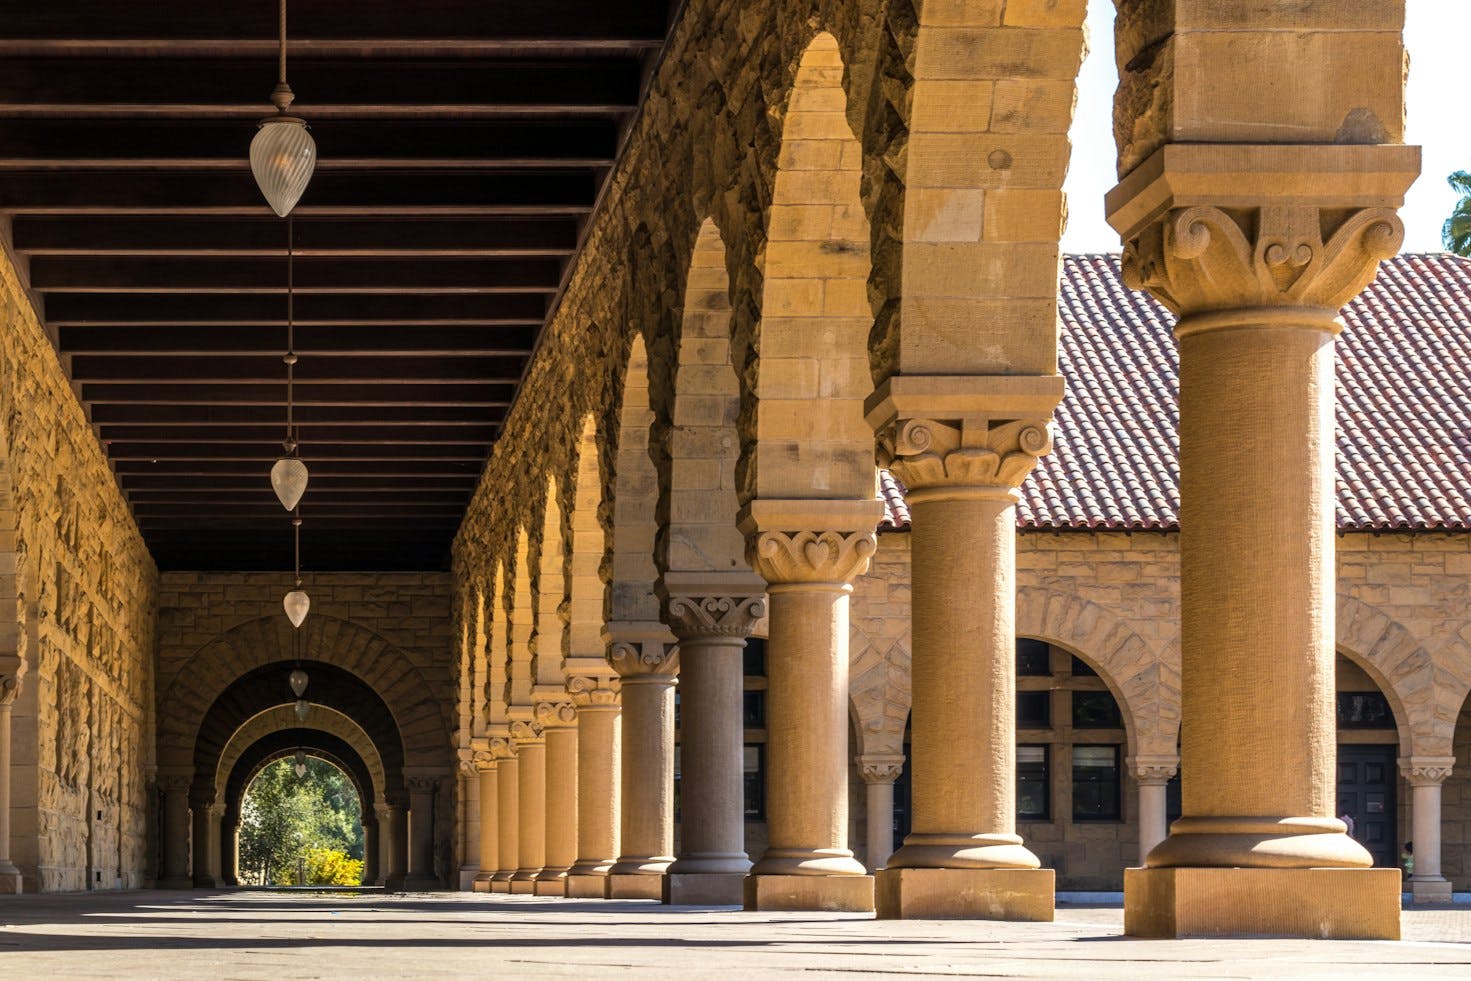 10 Fun and Interesting Facts About Stanford University